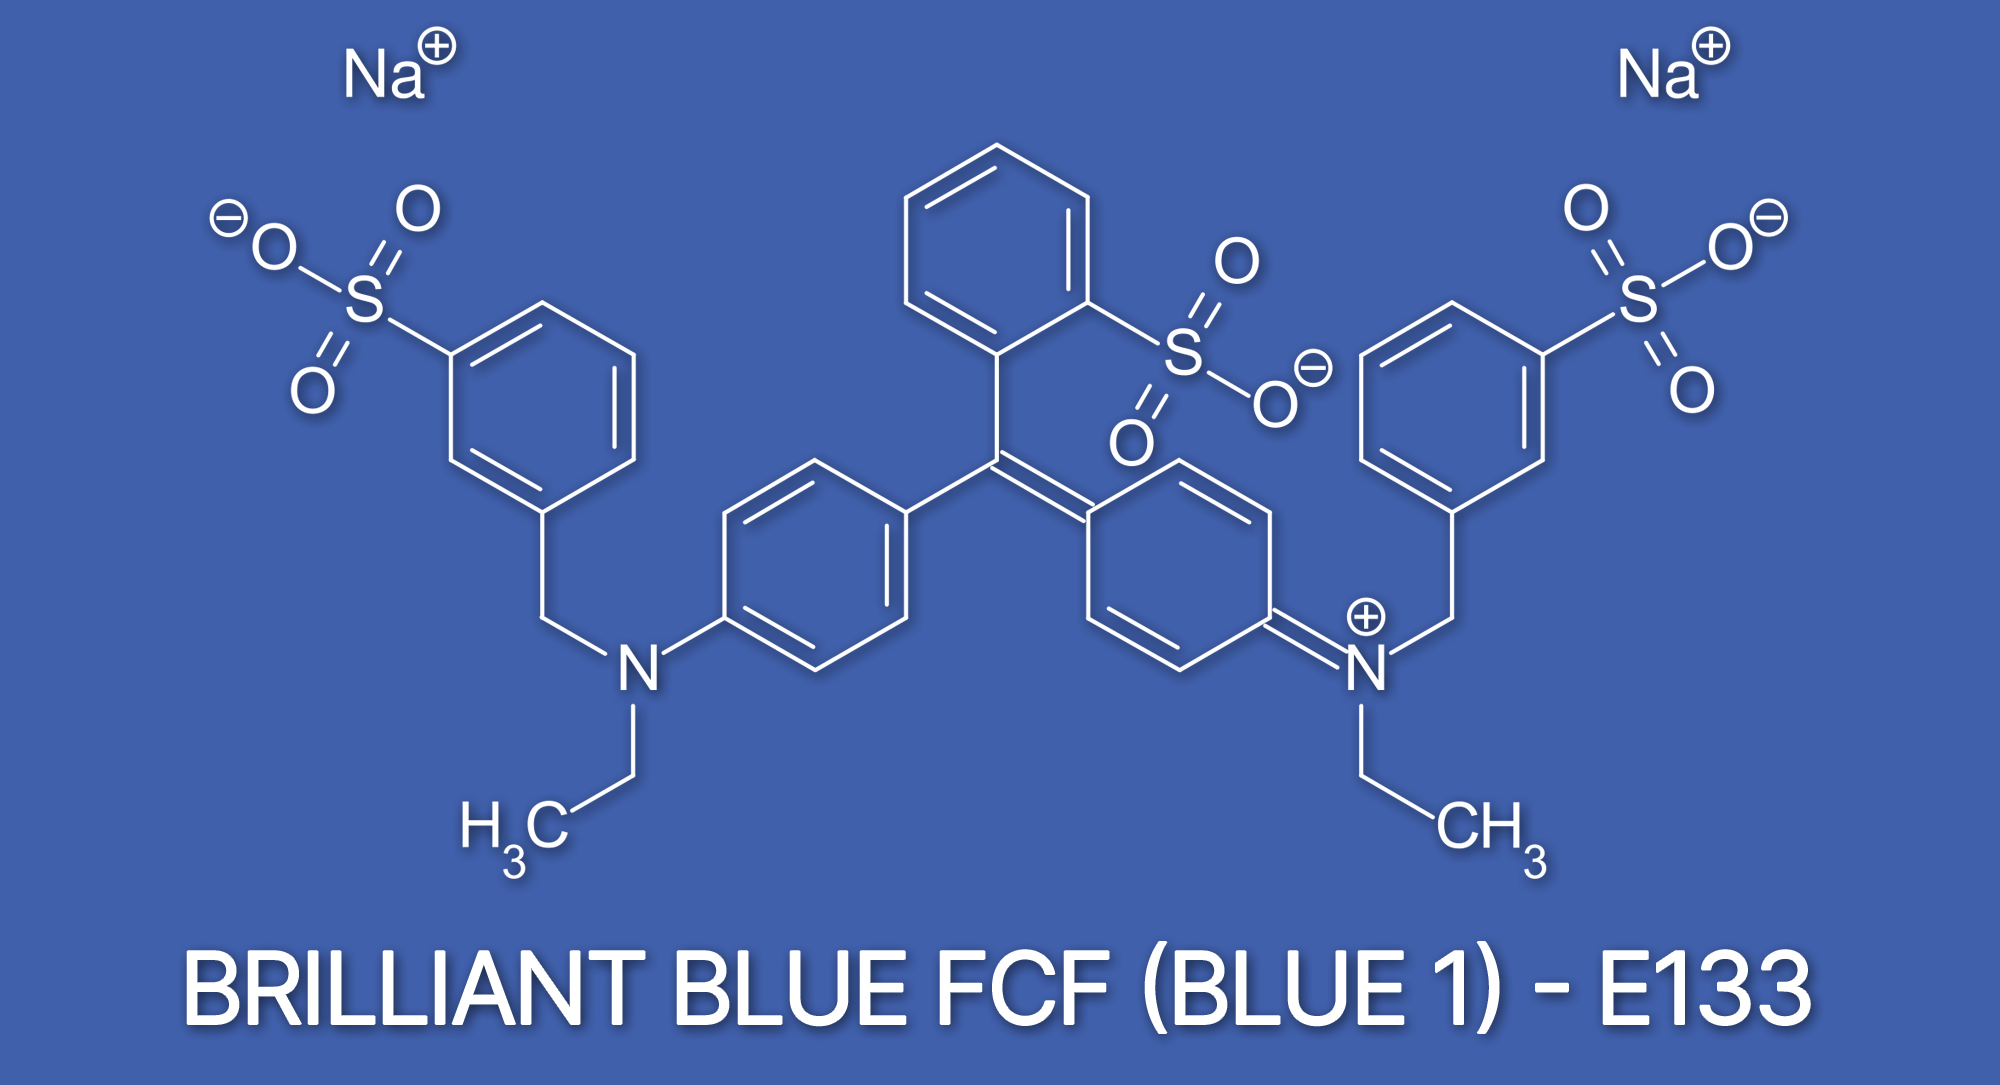 9. "Blue Hair Dye: Natural Alternatives to Chemical Dyes" - wide 10